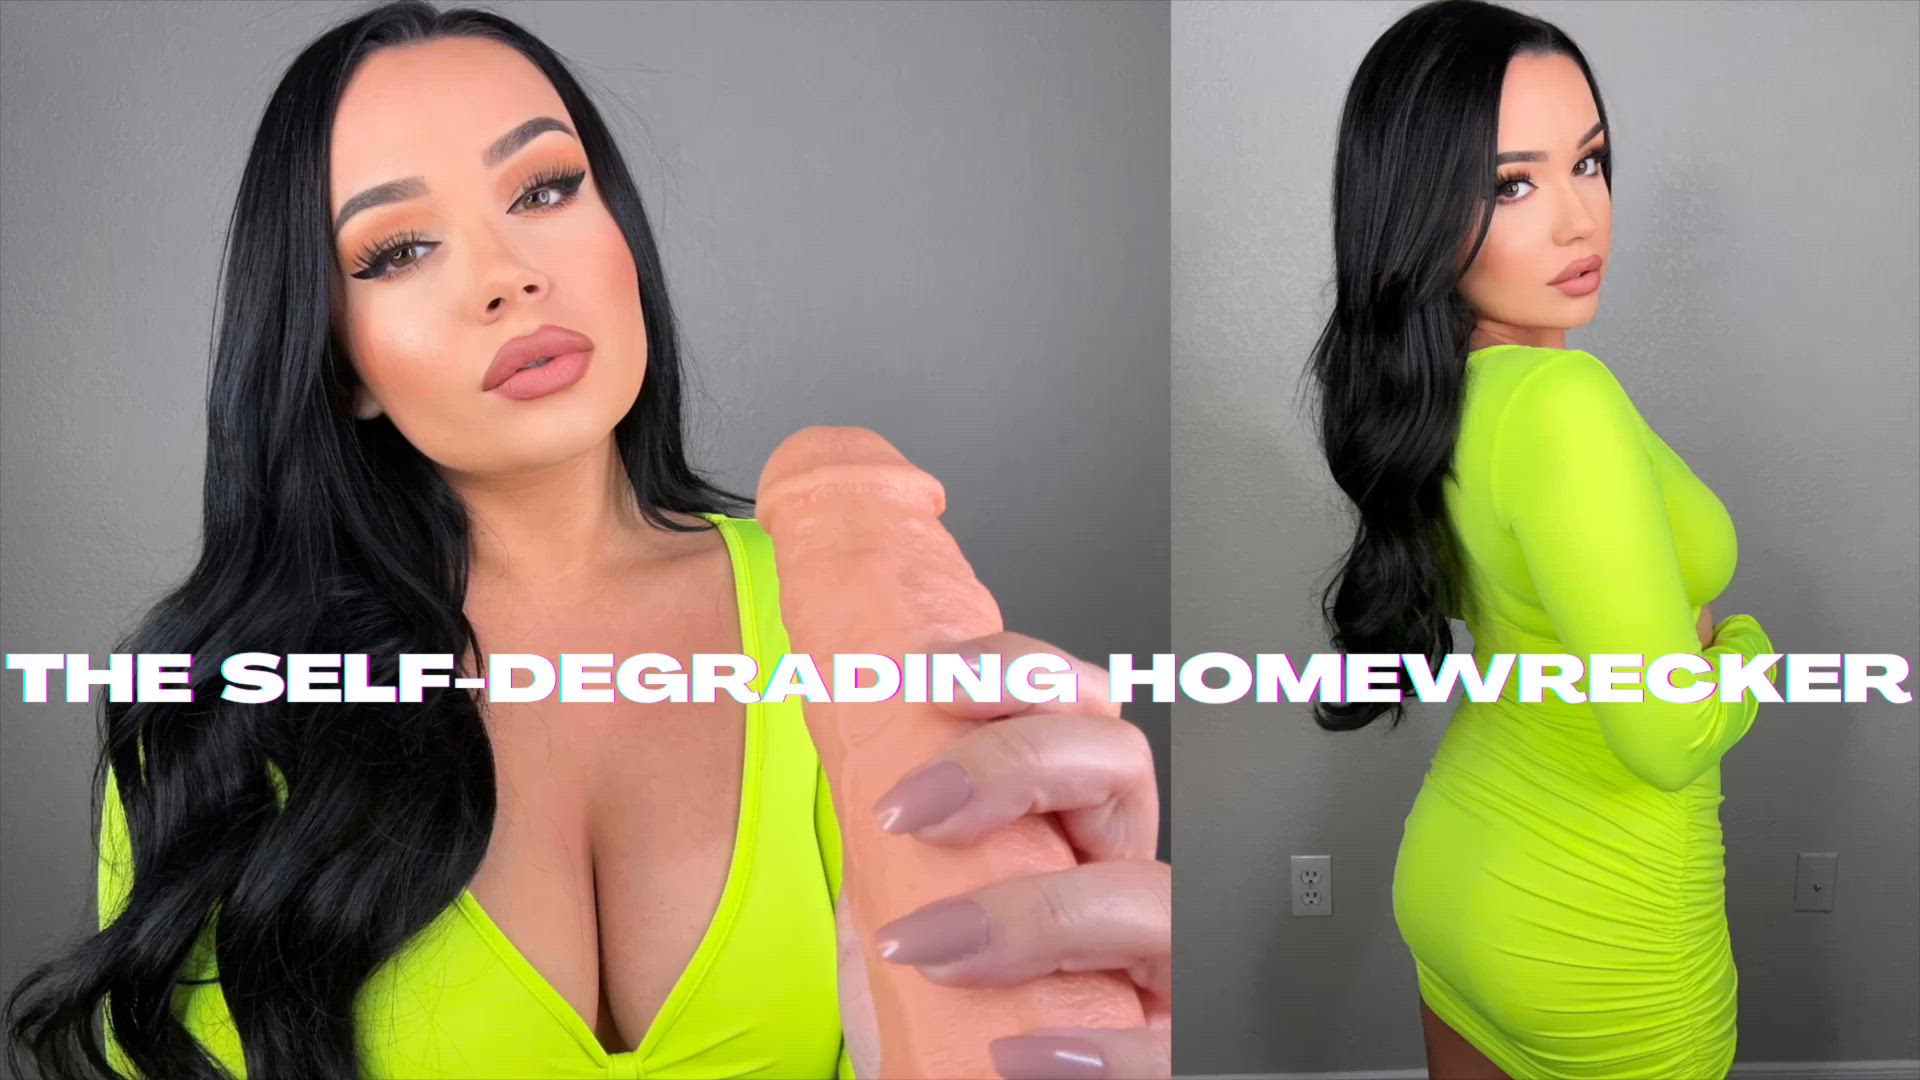 Solo porn video with onlyfans model miajocelyn <strong>@miajocelyn</strong>